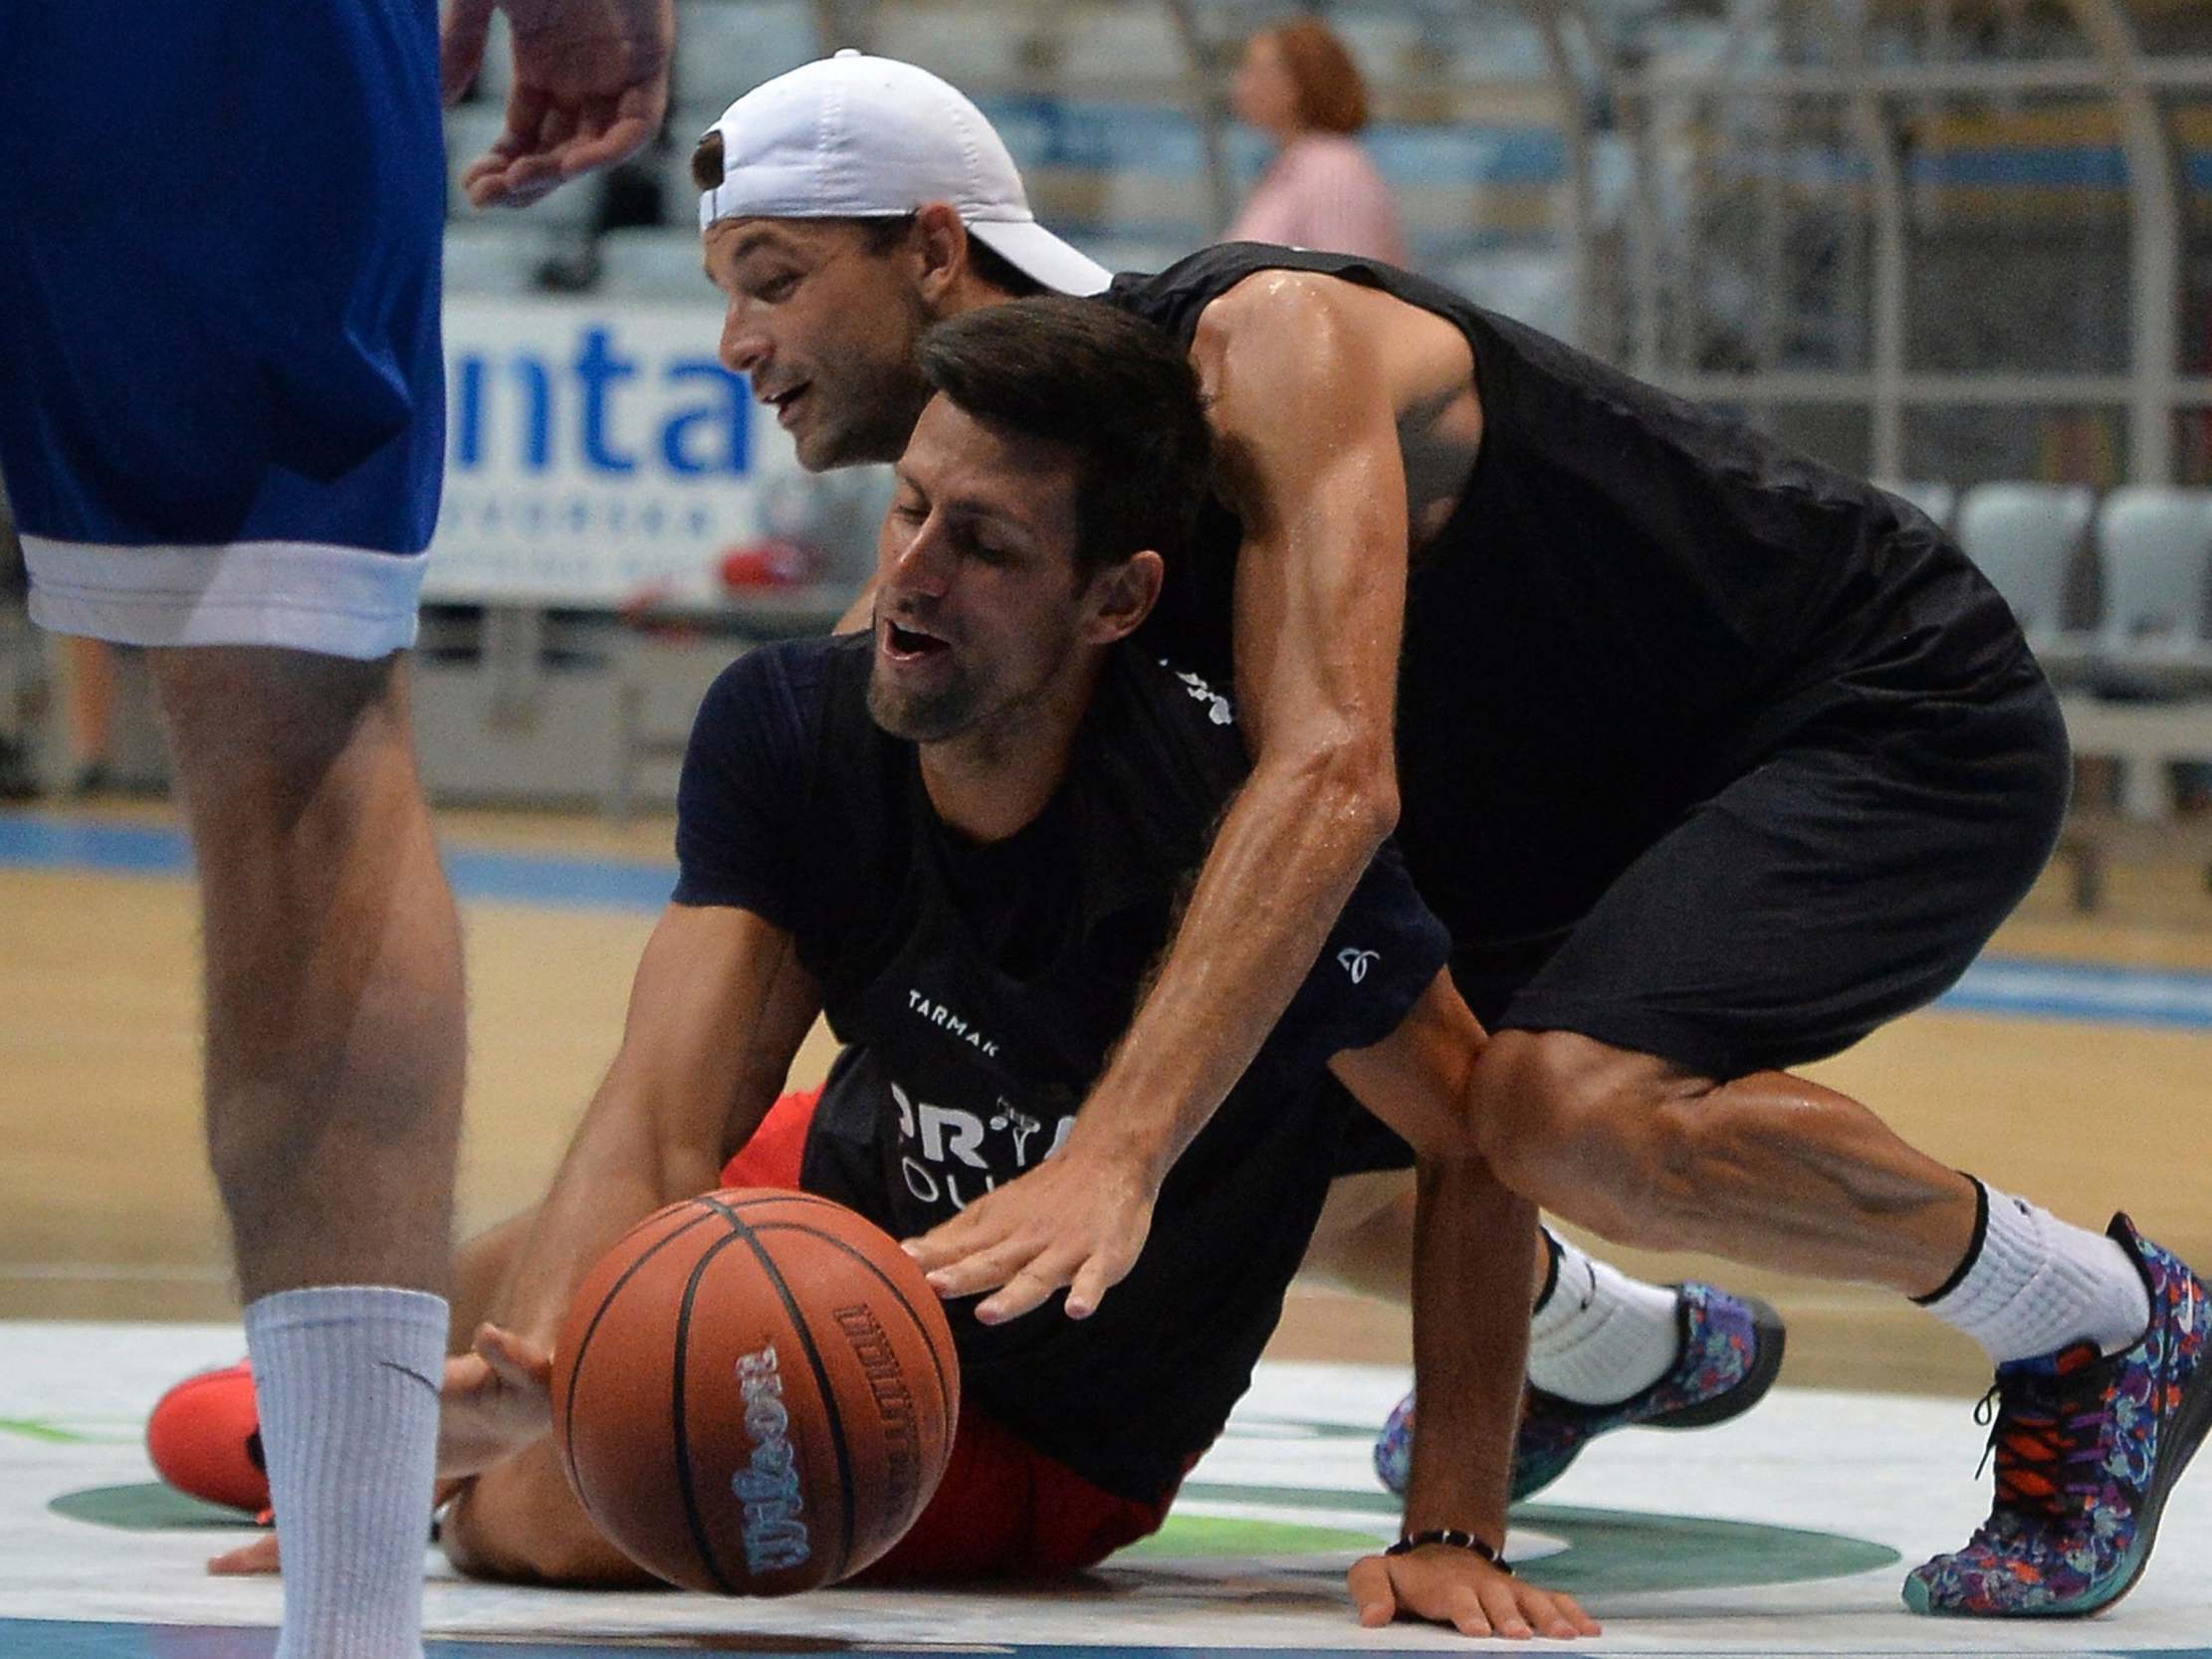 Djokovic played football and basketball with other players while on the Adria Tour